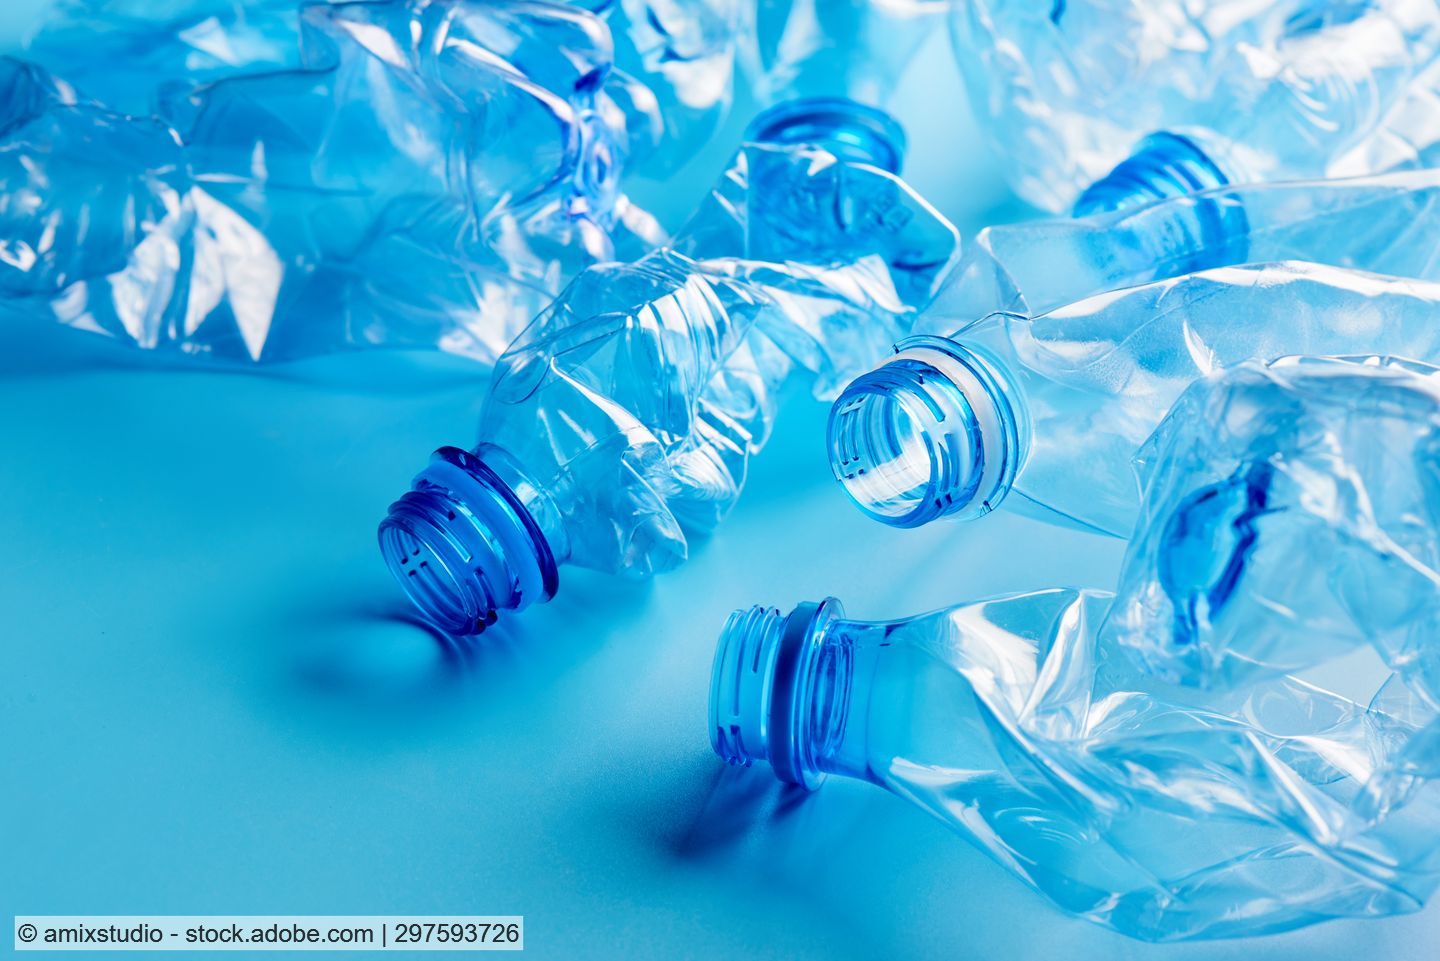 Carbios and Indorama Ventures plan to build PET recycling plant in East of France